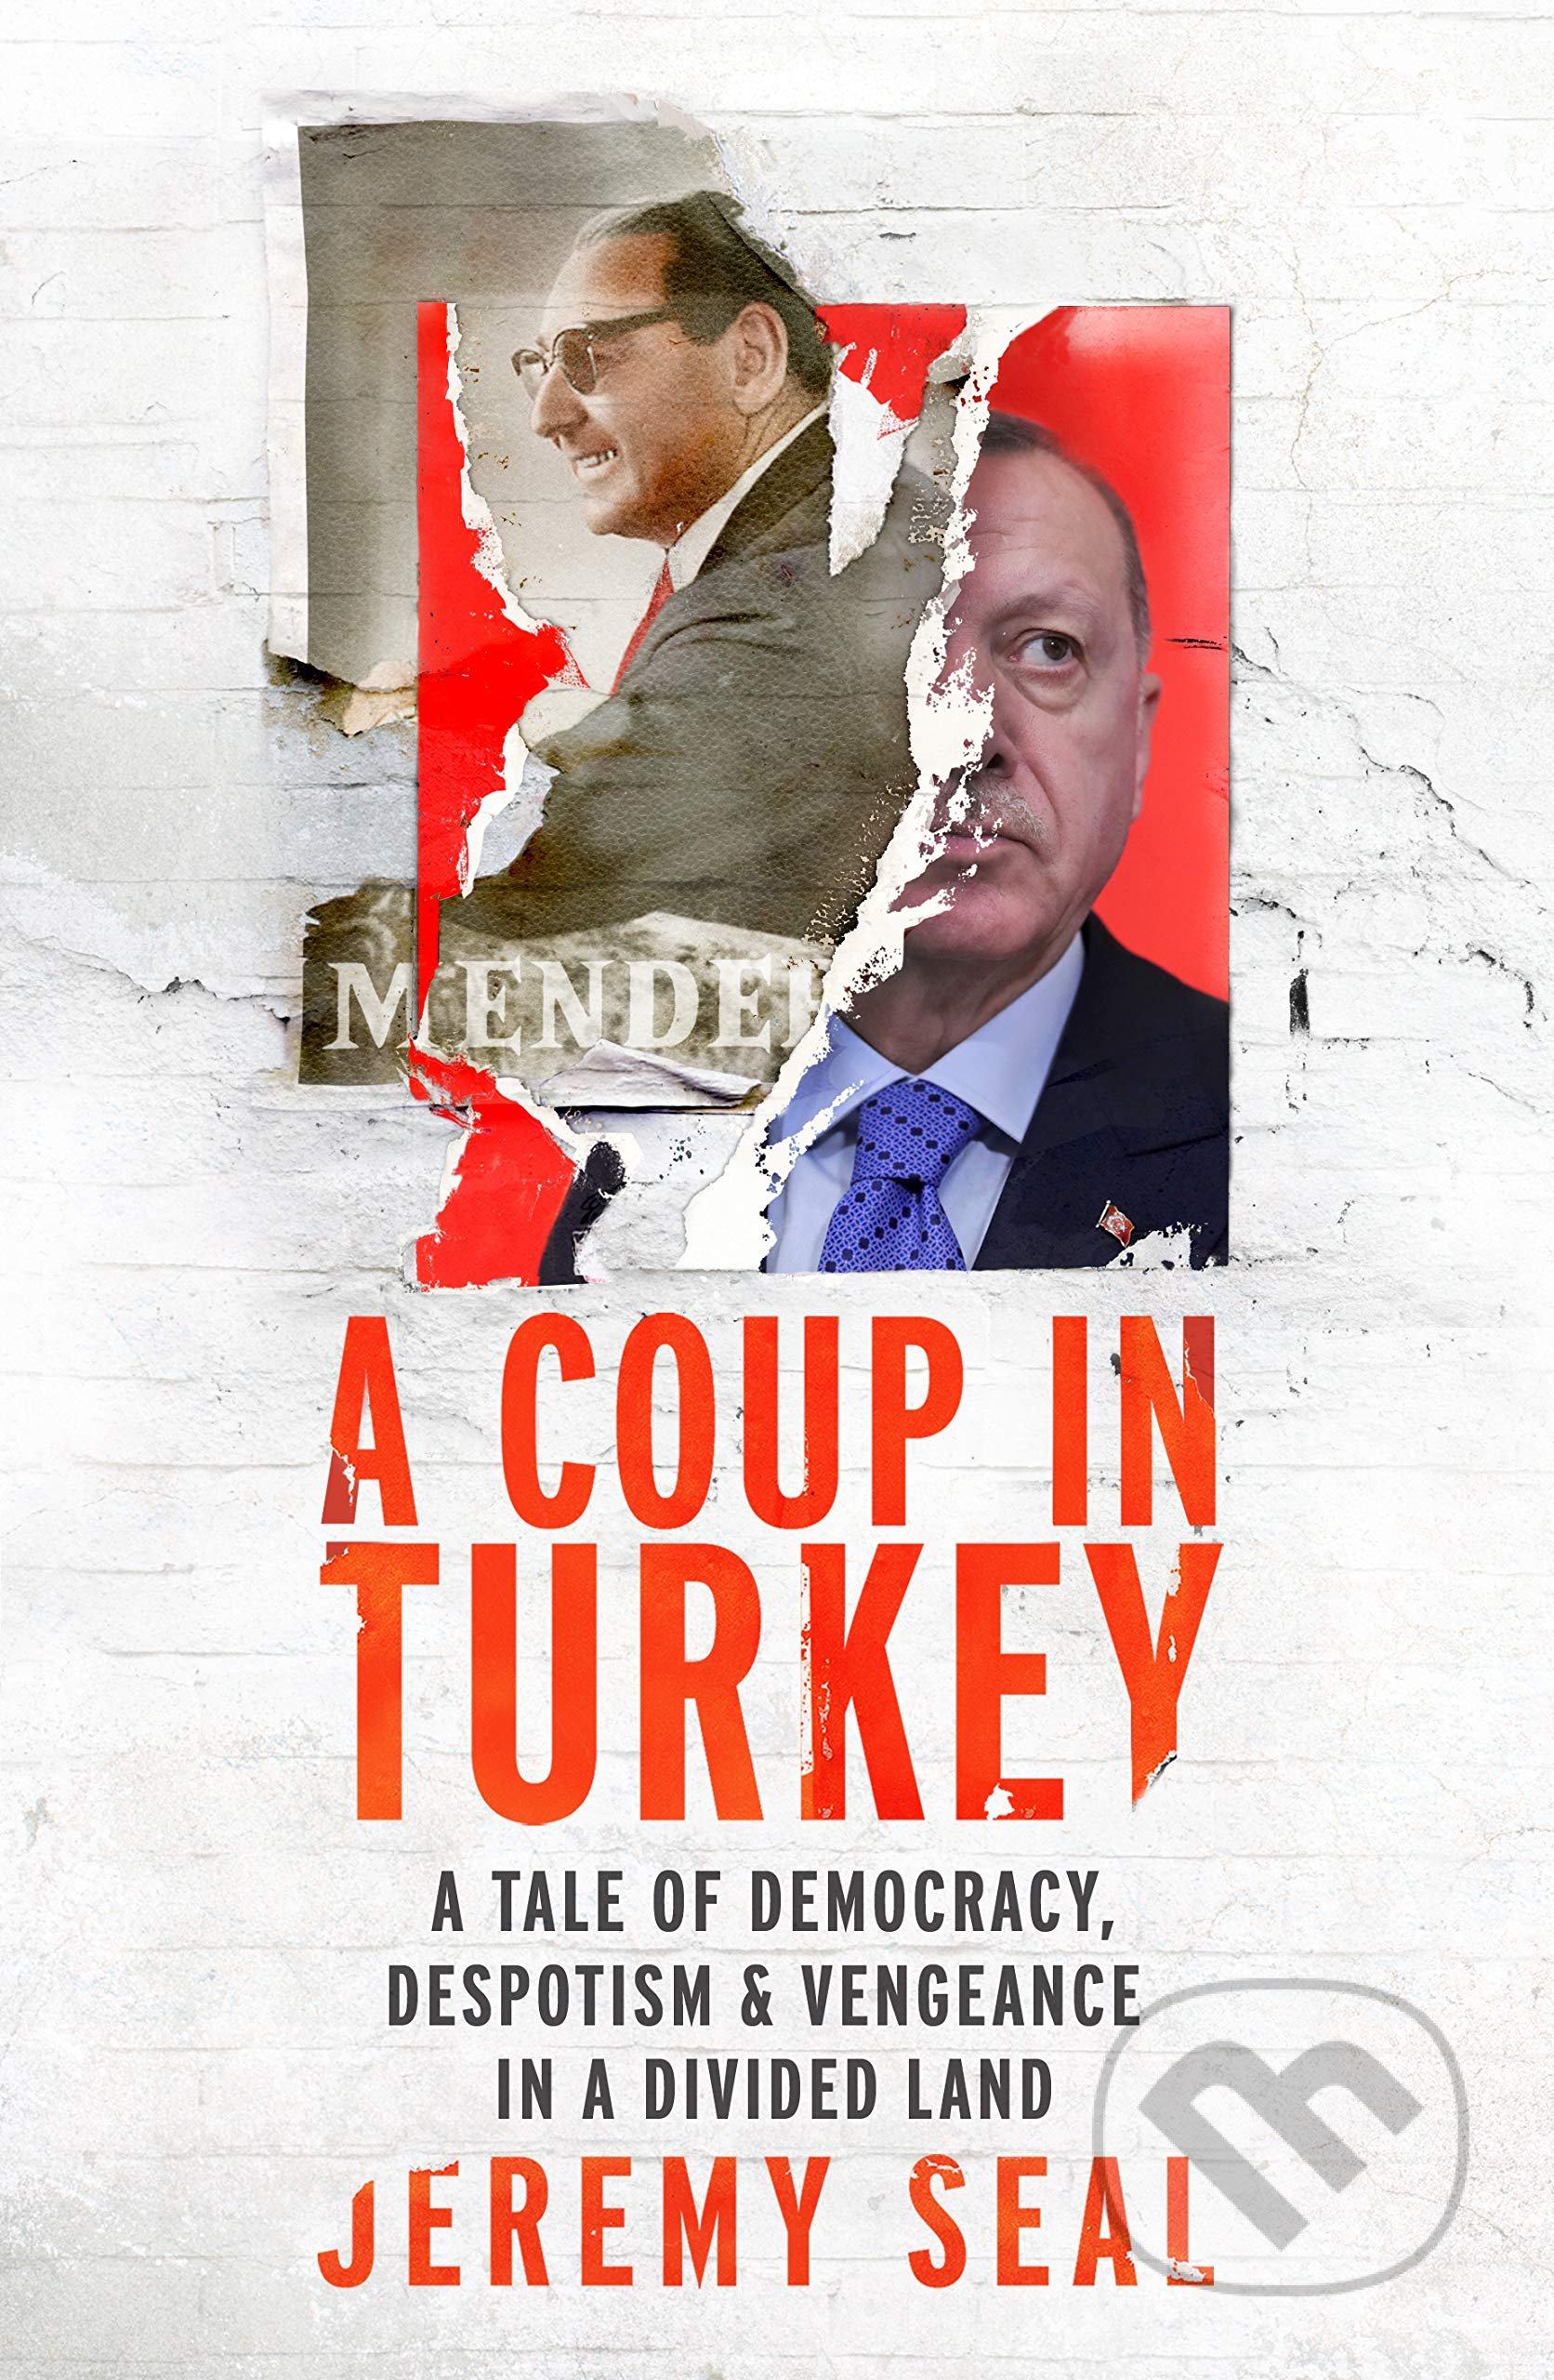 A Coup in Turkey - Jeremy Seal, Chatto and Windus, 2021